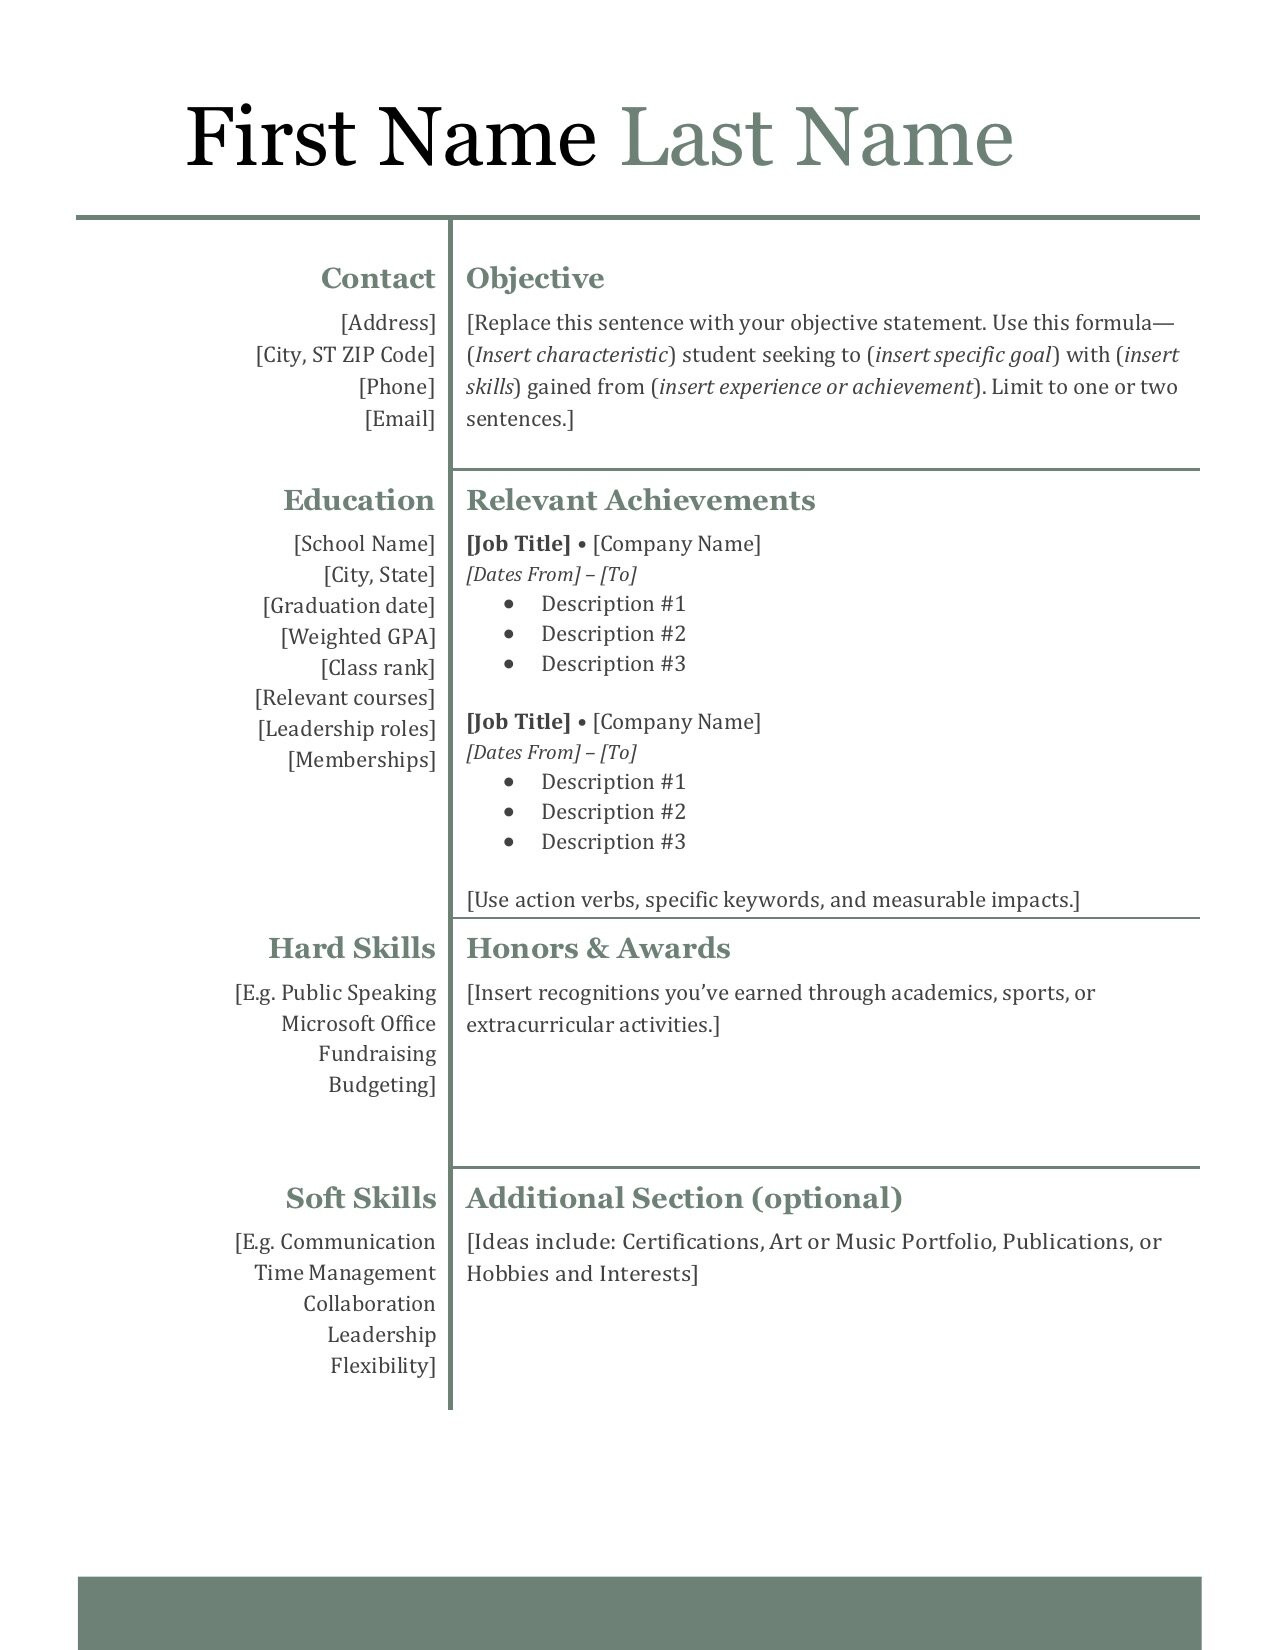 Sample Resume Objectives for High School Student How to Write An Impressive High School Resume â Shemmassian …